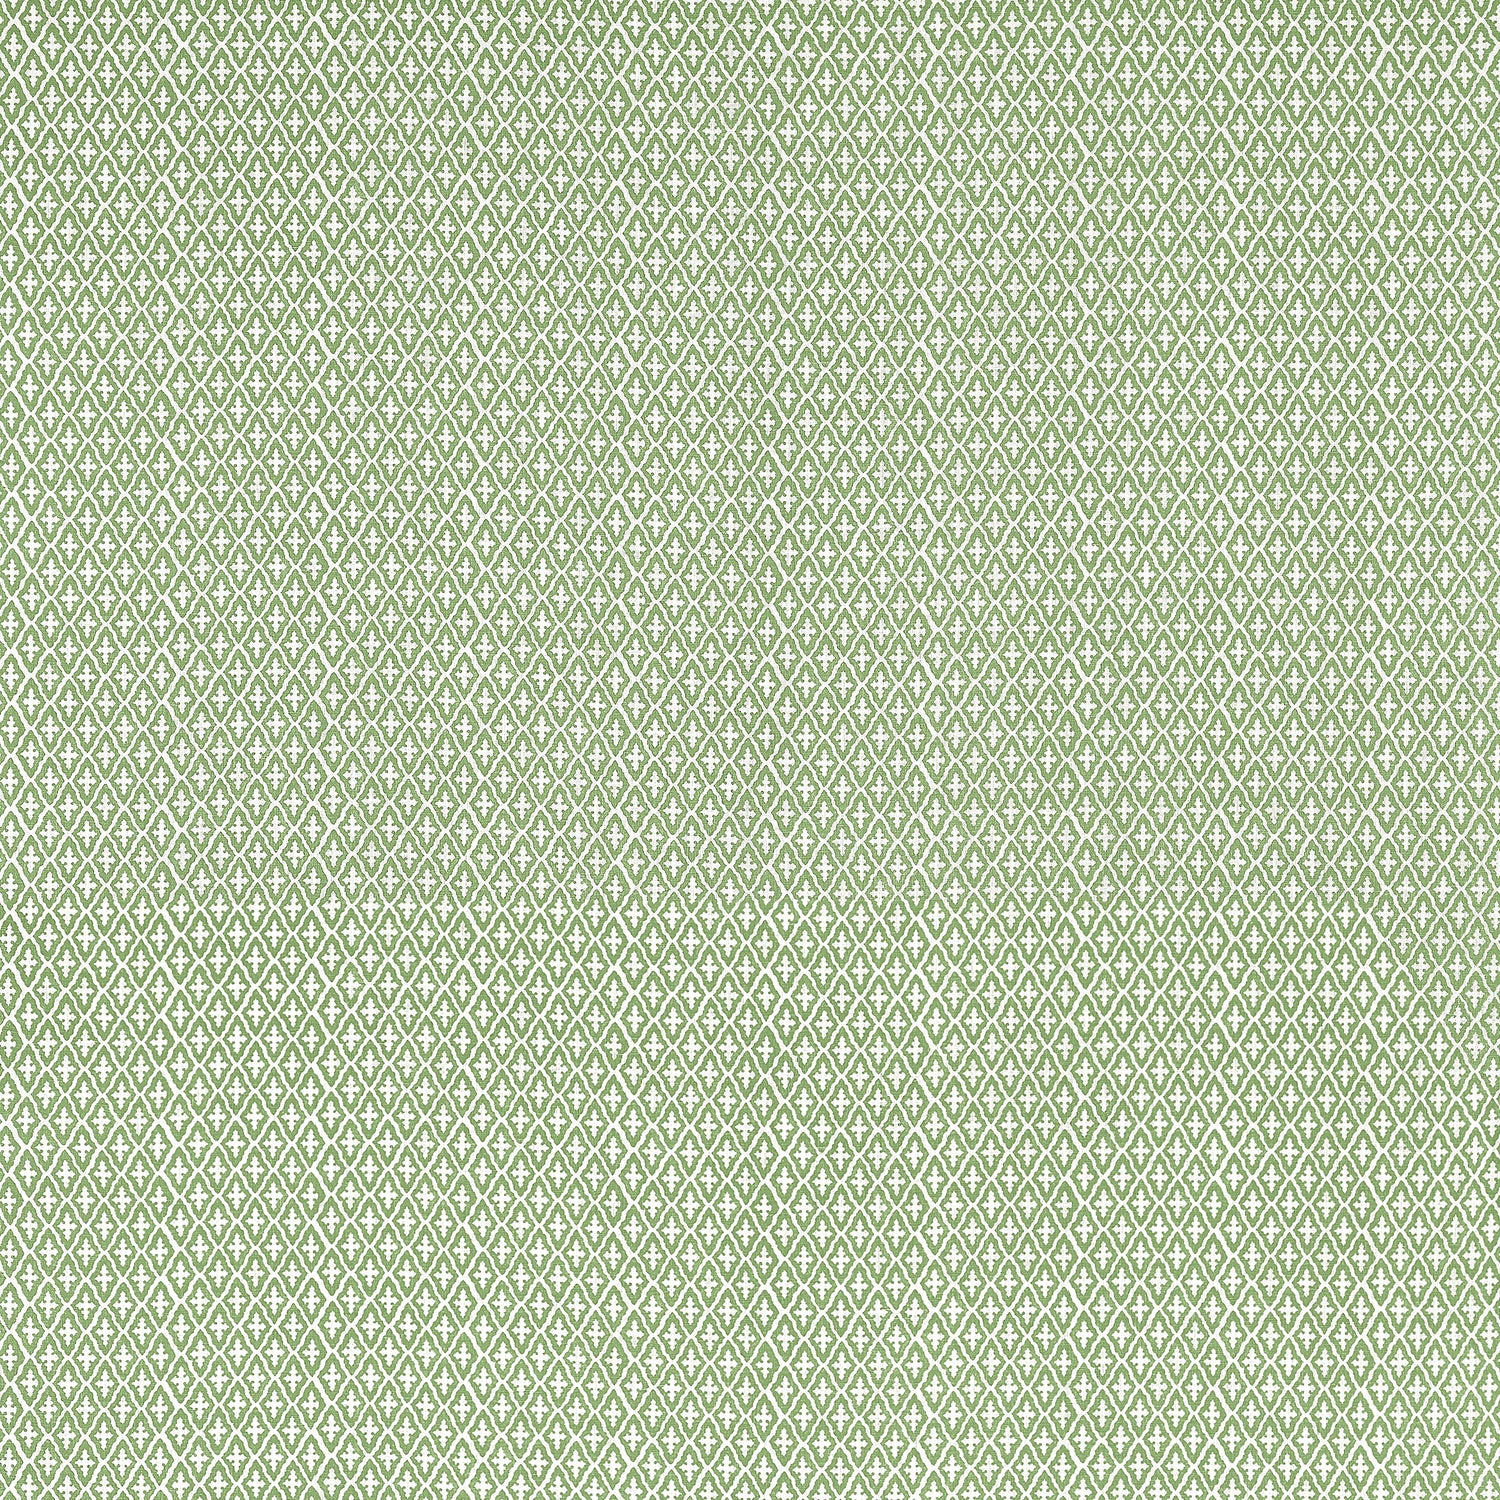 Lindsey fabric in green color - pattern number AF57814 - by Anna French in the Bristol collection